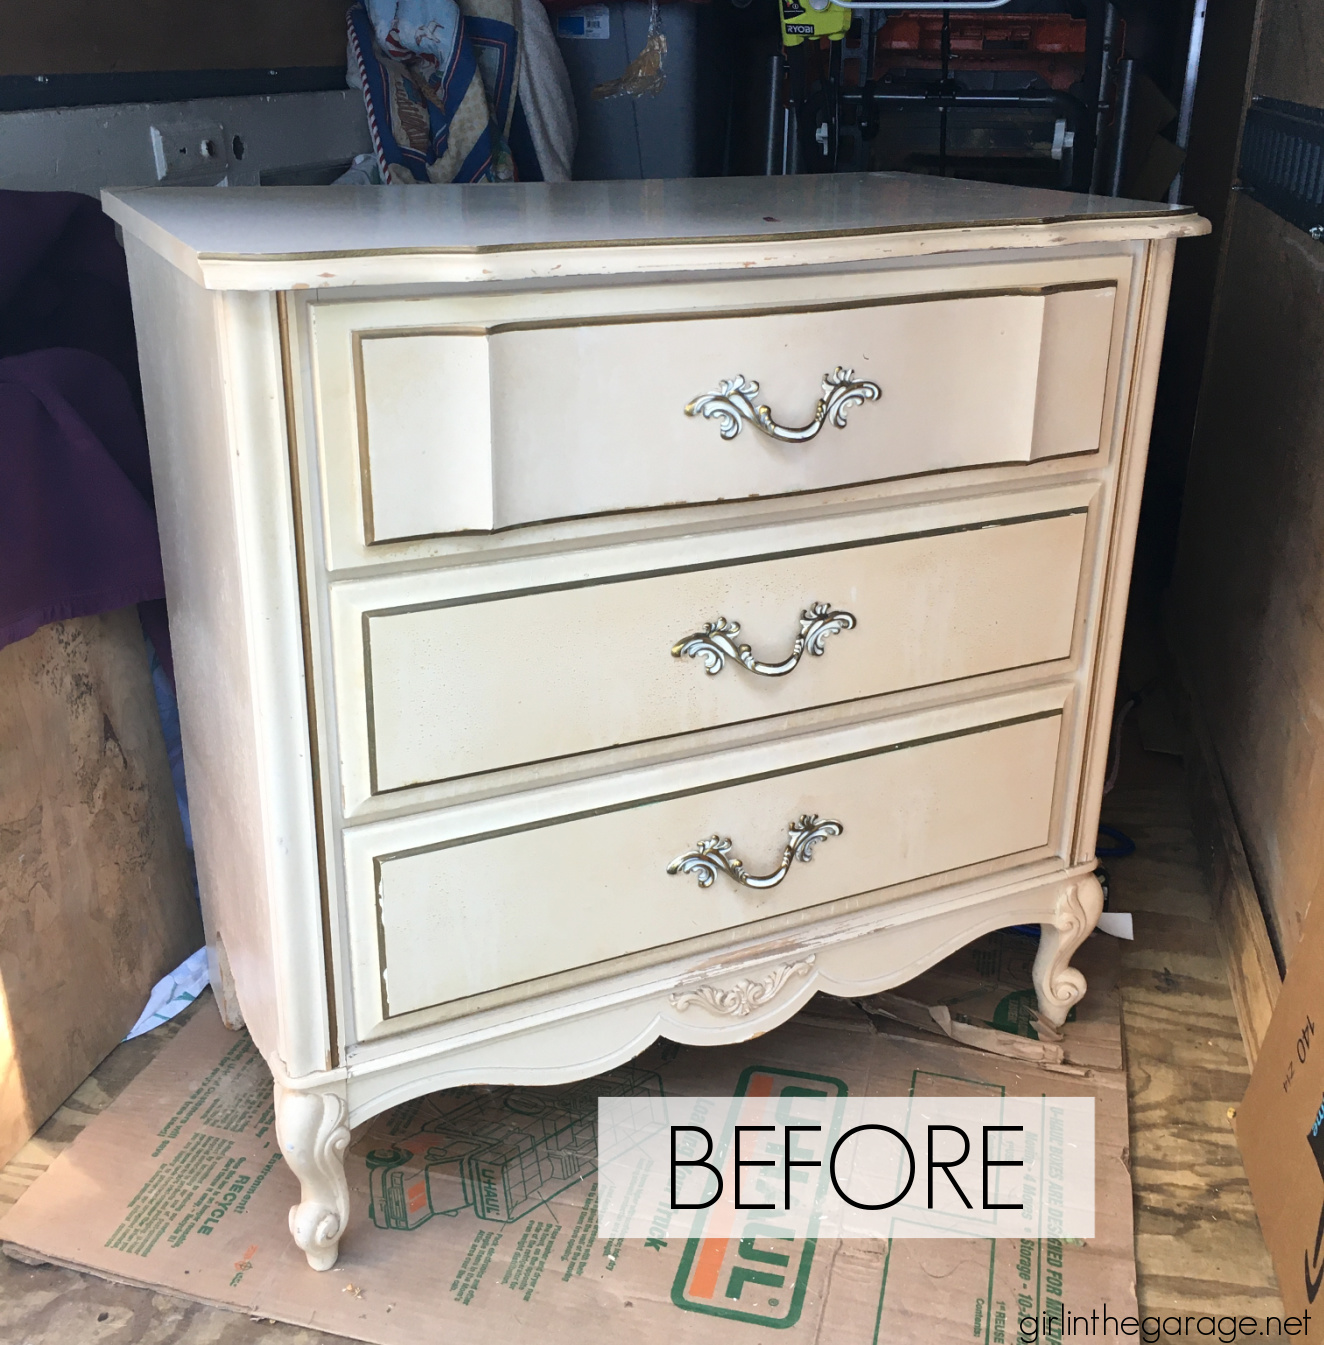 YES you can paint laminate furniture! Learn how to prep and paint laminate furniture with Chalk Paint for beautiful results. Painted furniture ideas by Girl in the Garage